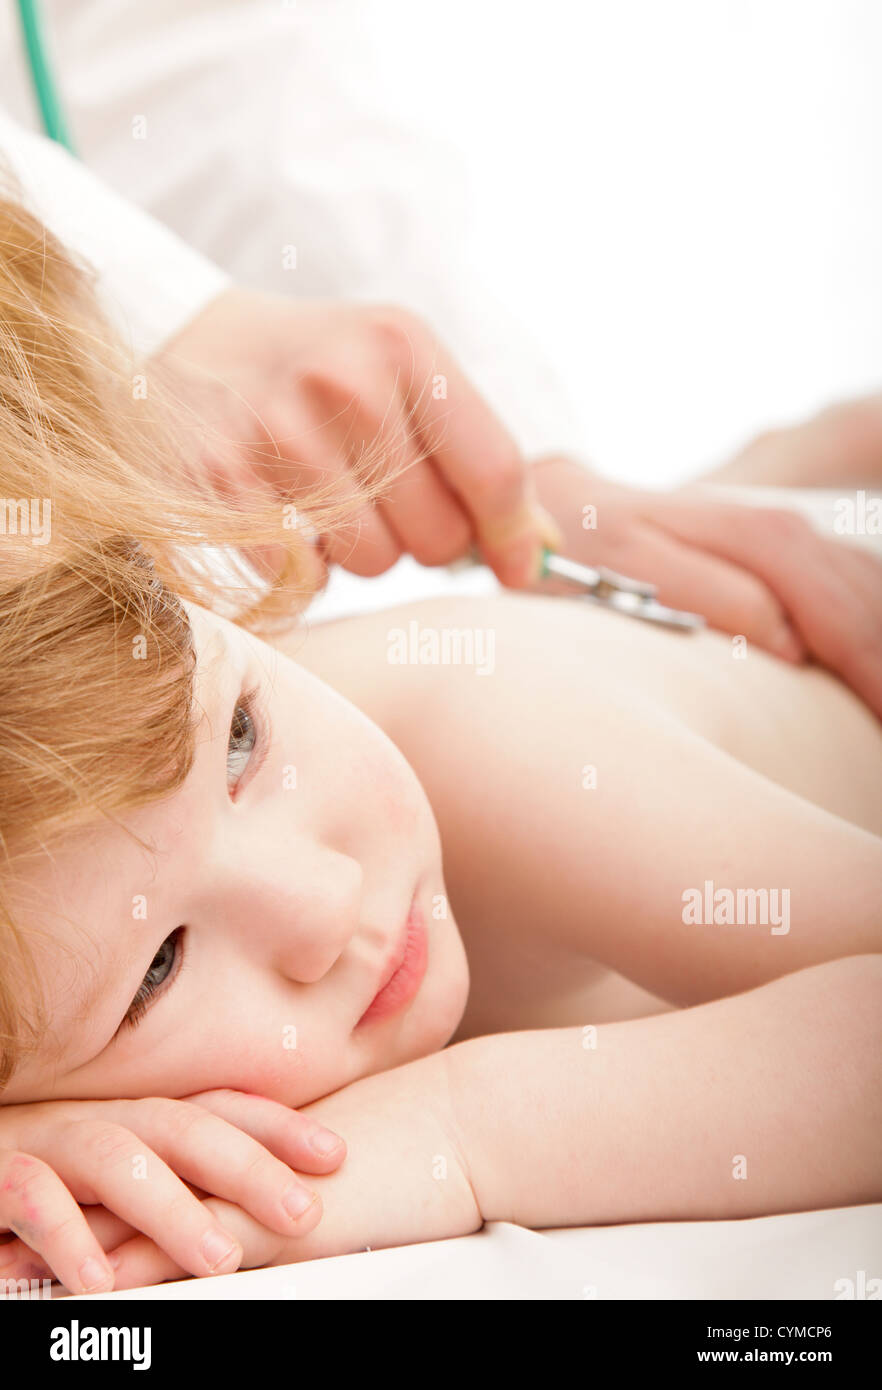 Cute child and a doctor Stock Photo